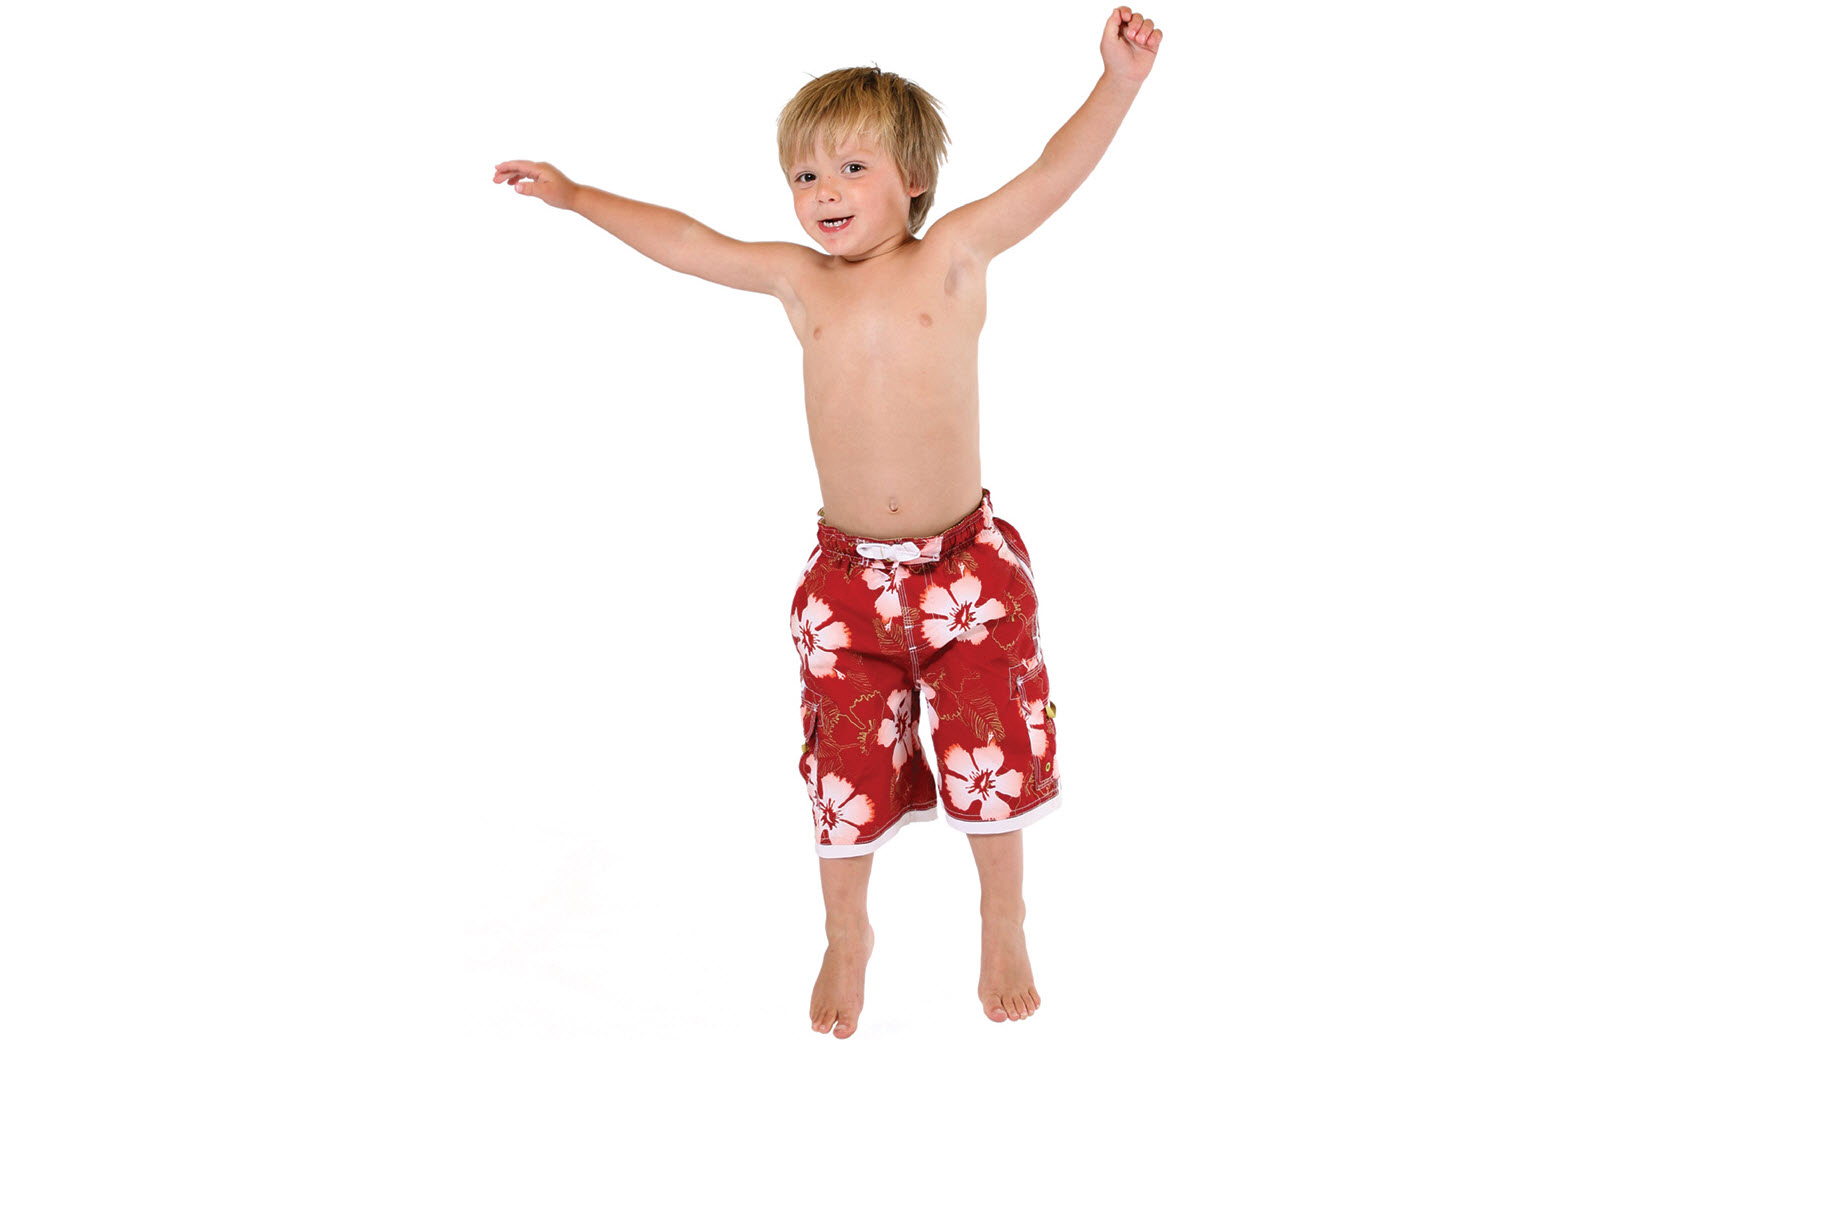 water babies best gear for the summer fun kid jump into the pool